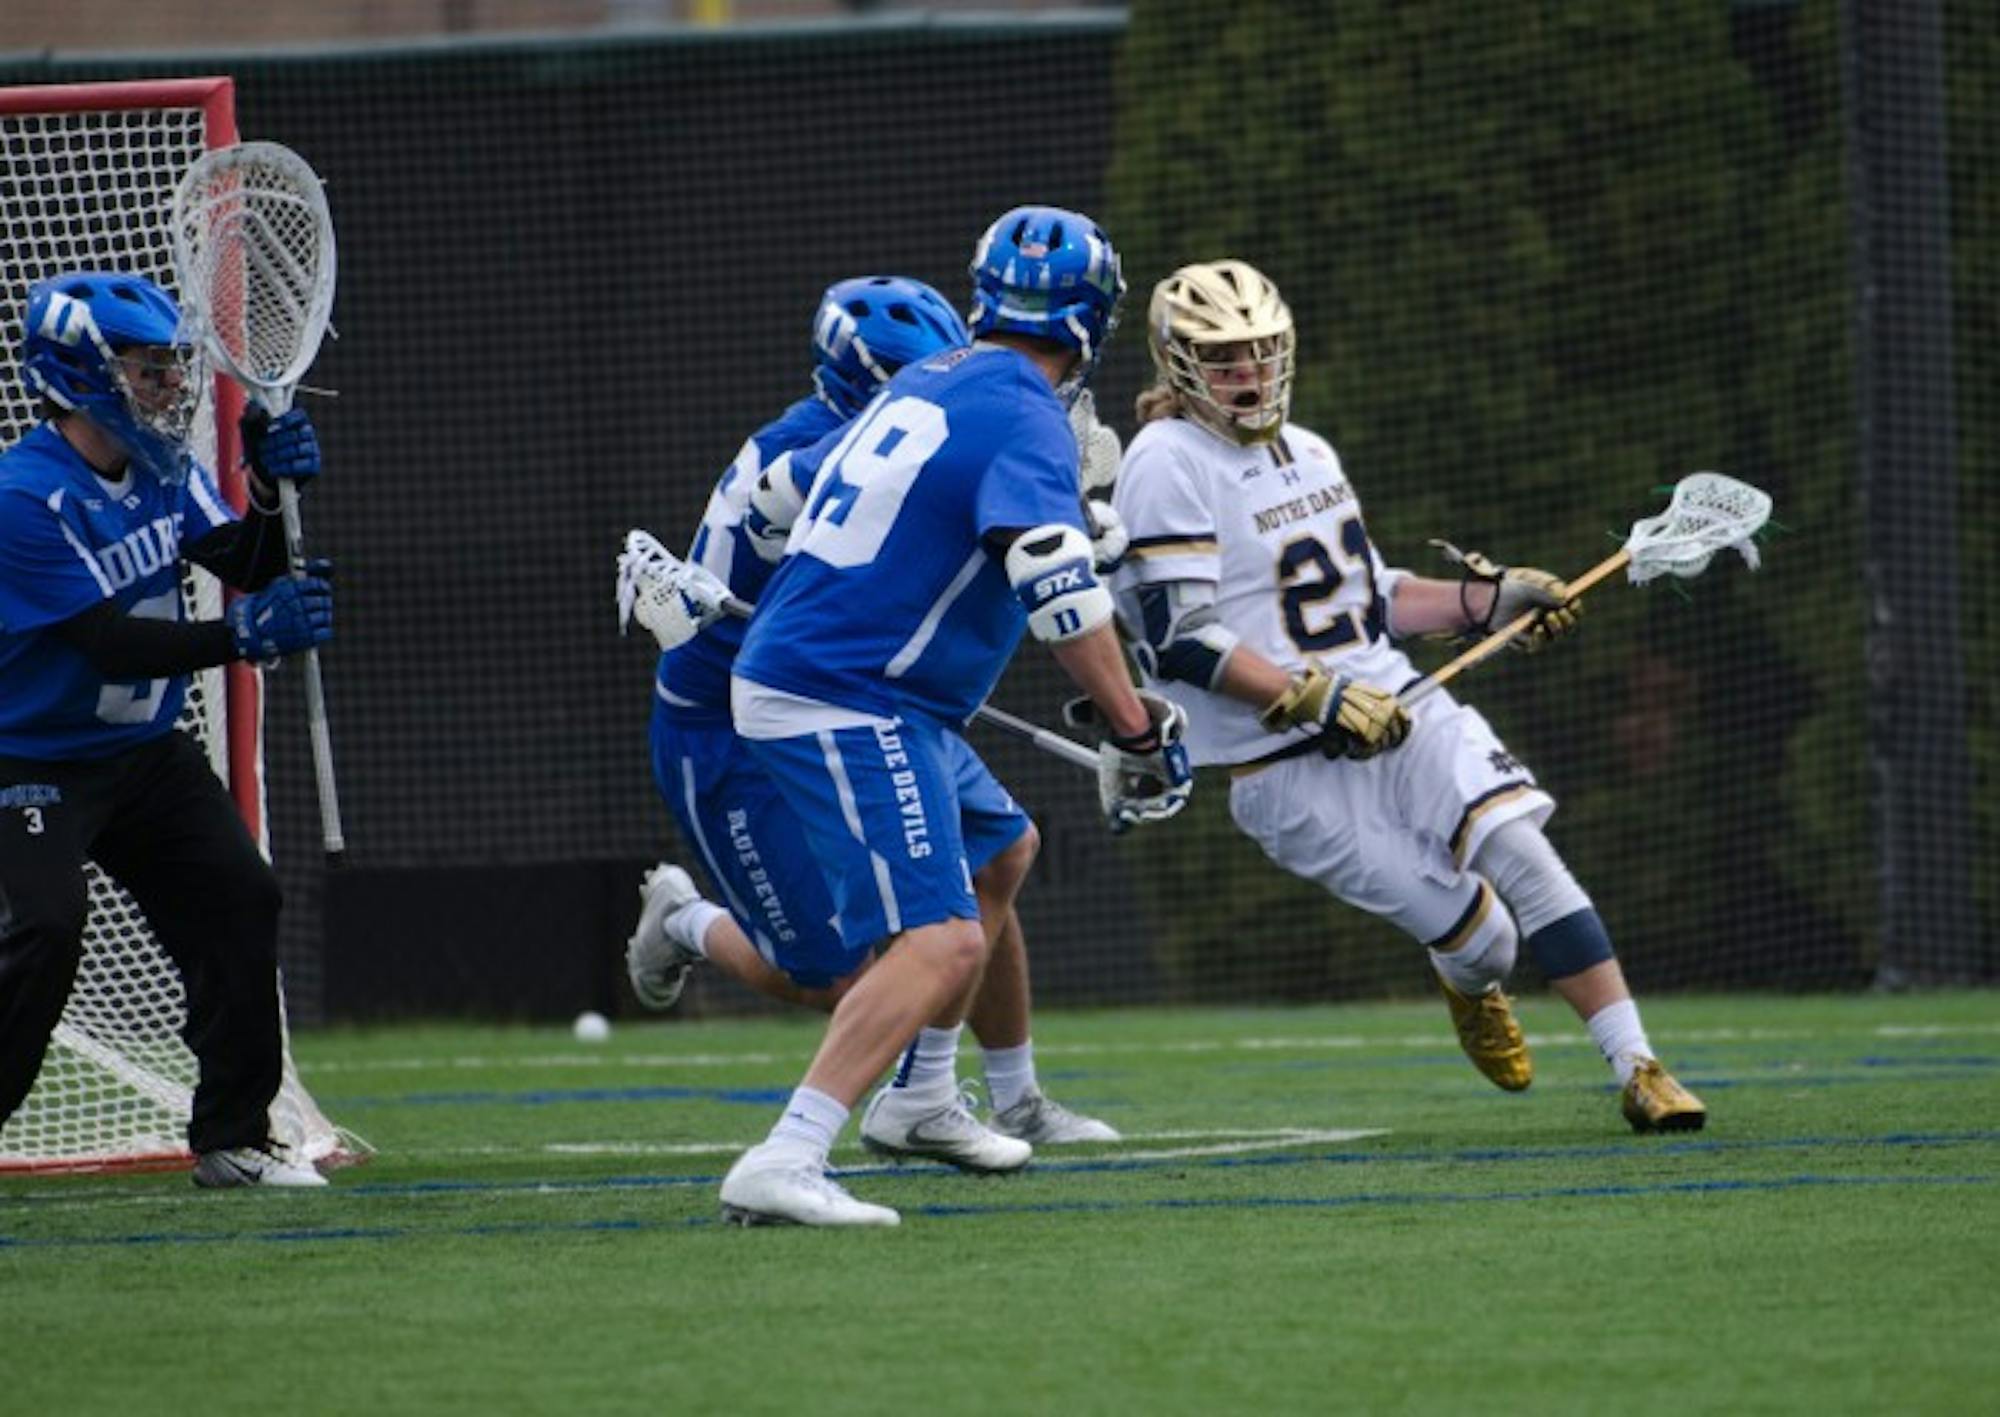 Irish freshman attack Ryder Garnsey fights for a shooting angle during Notre Dame’s 8-6 win over Duke on April 10 at Arlotta Stadium.